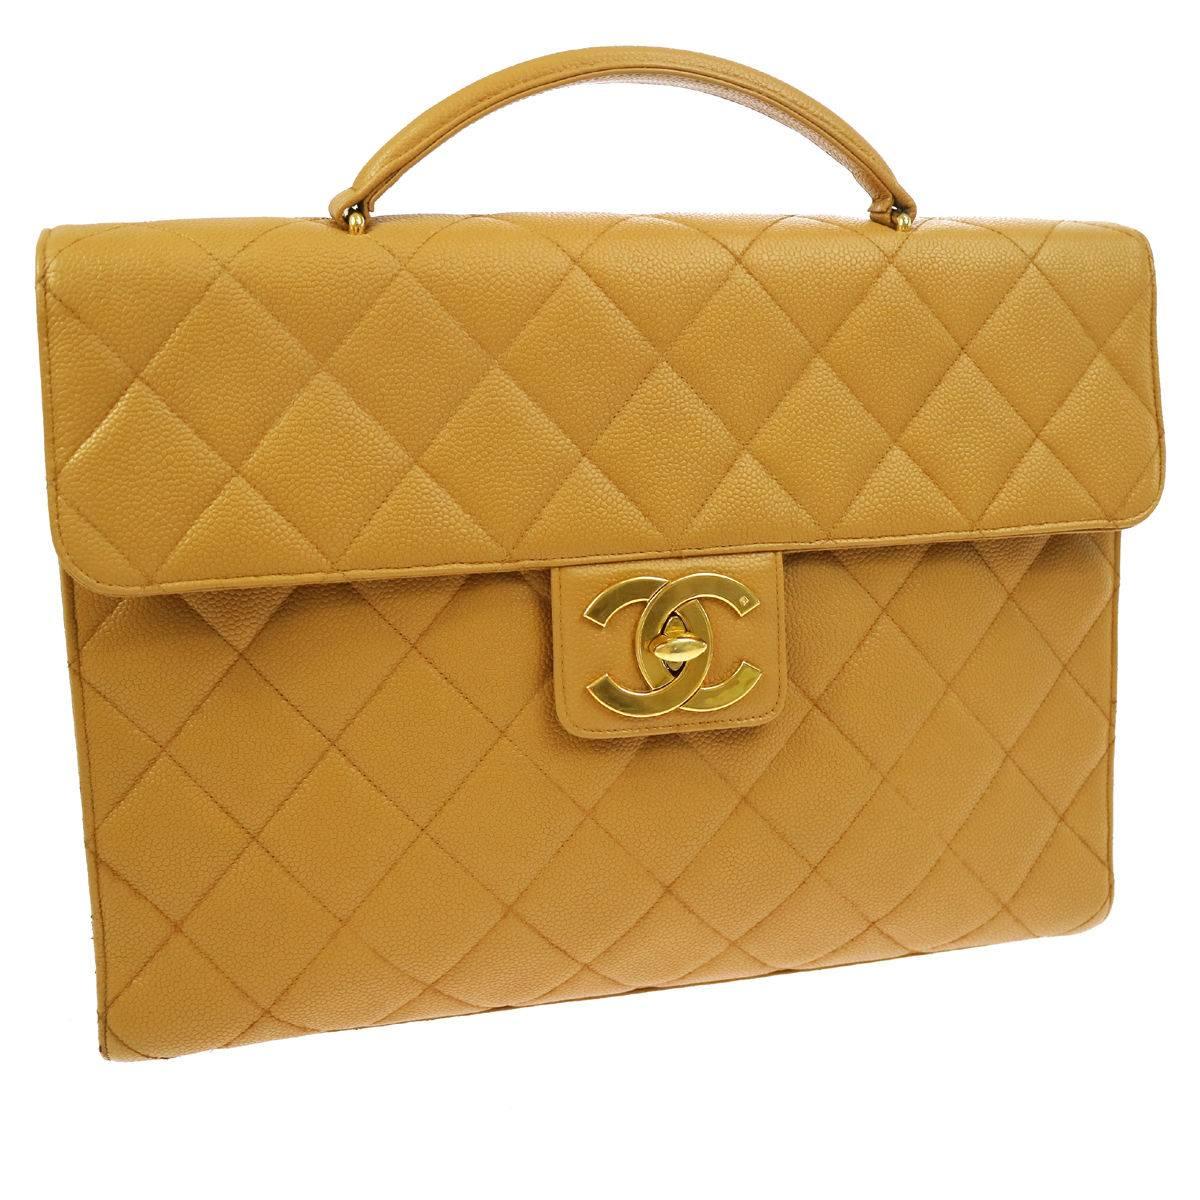 Chanel Nude Tan Caviar Leather Quilted Men's Women's Briefcase Top Handle Bag